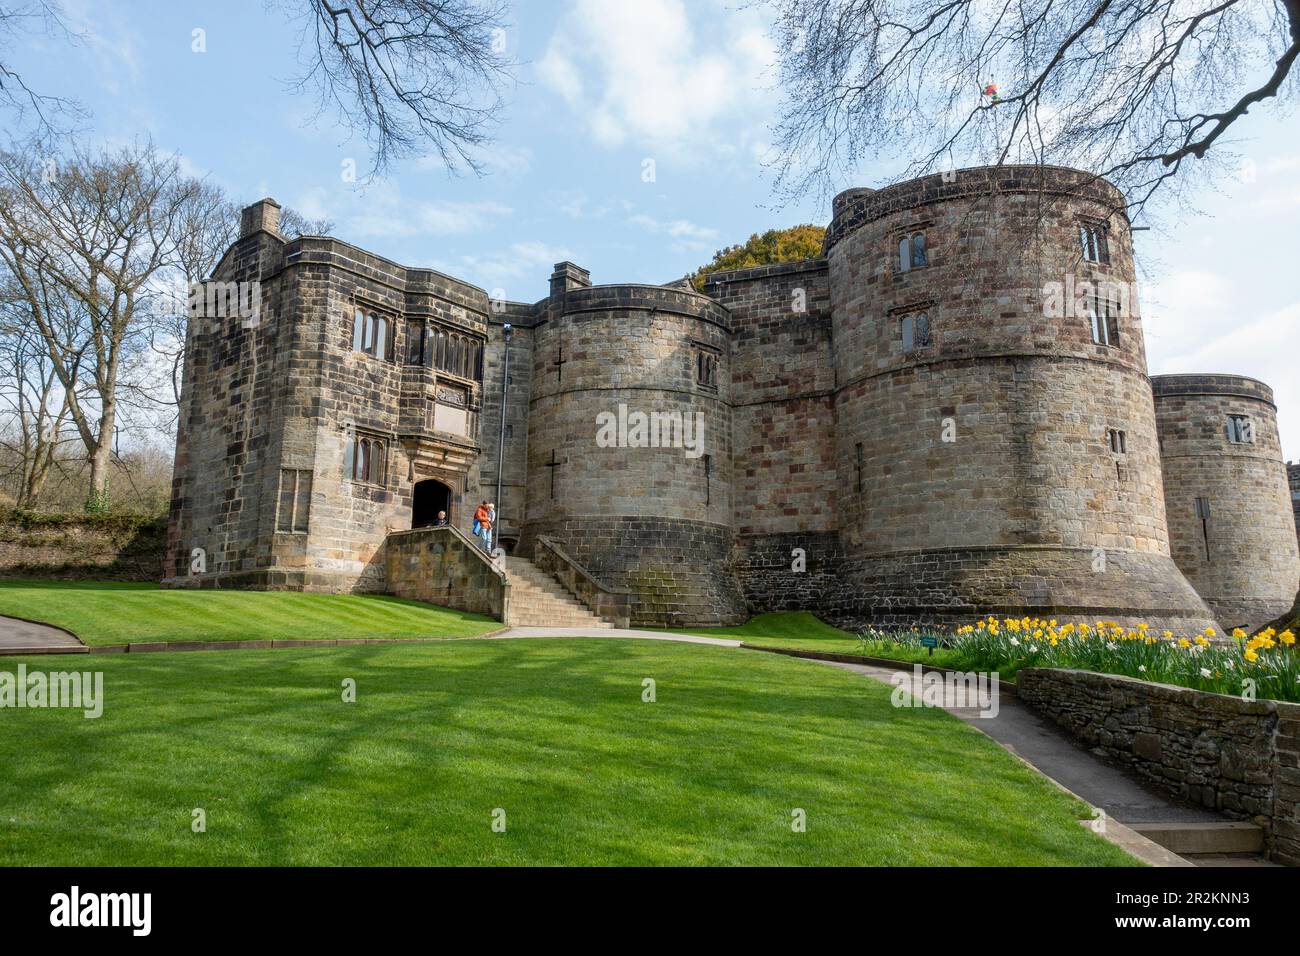 Medieval Keep at Skipton Castle in Skipton, North Yorkshire, England, UK Stock Photo